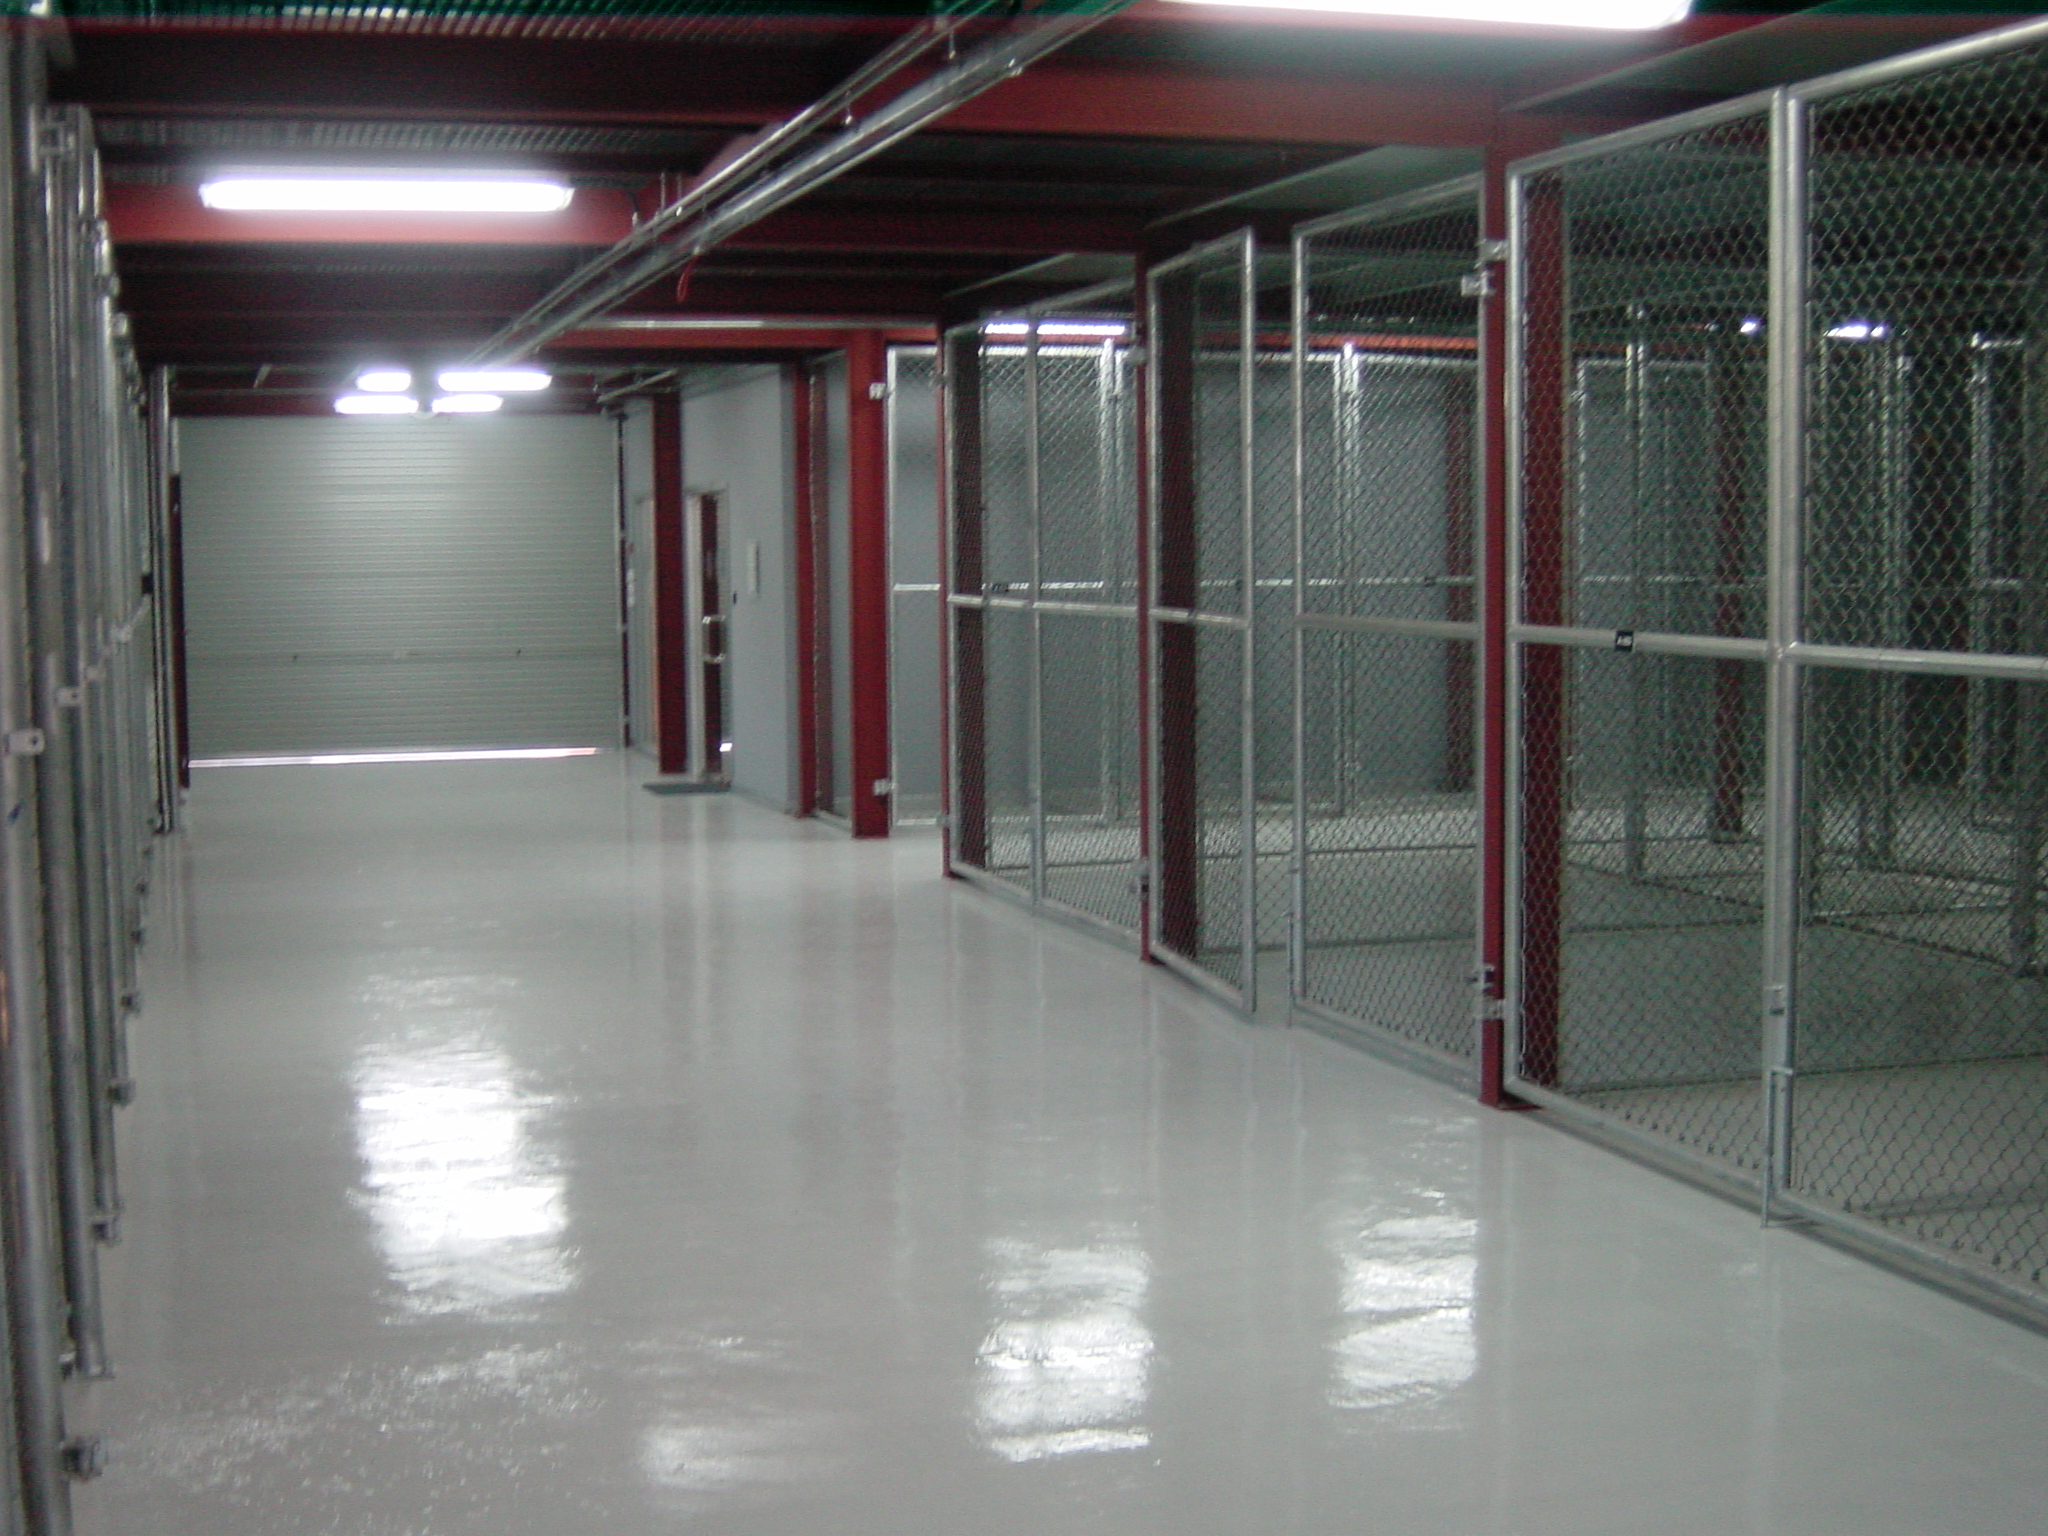 What is the purpose of using self-storage units?